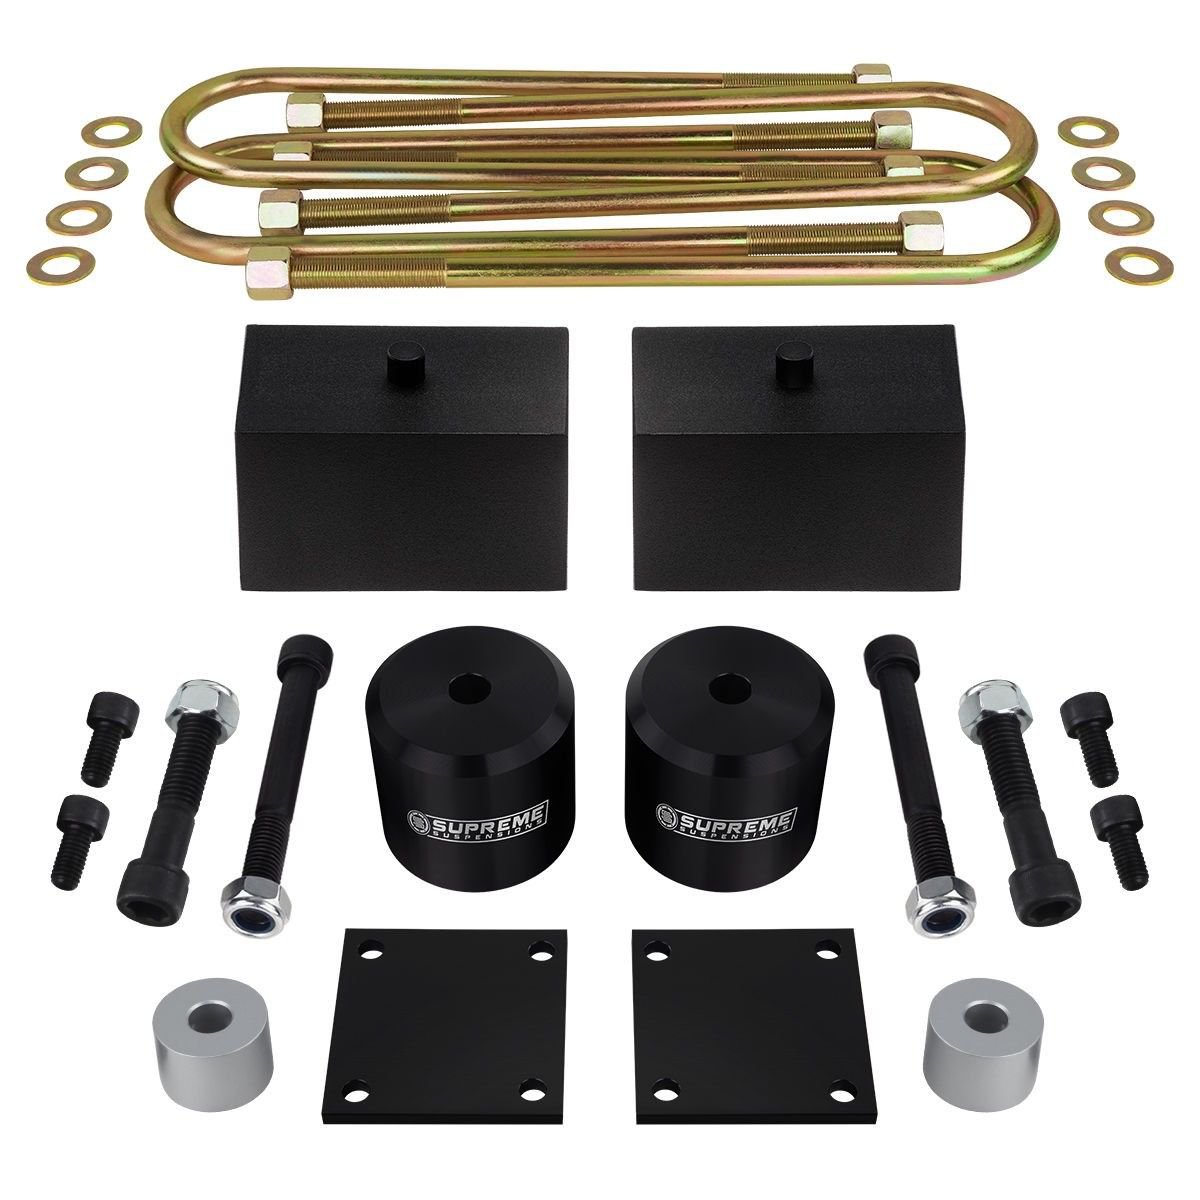 05-19 Ford F250 SuperDuty Complete 3" Inch Billet Level Lift Kit 4X4 OVERLOADS 3 Inch Lift Kit For Ford F250